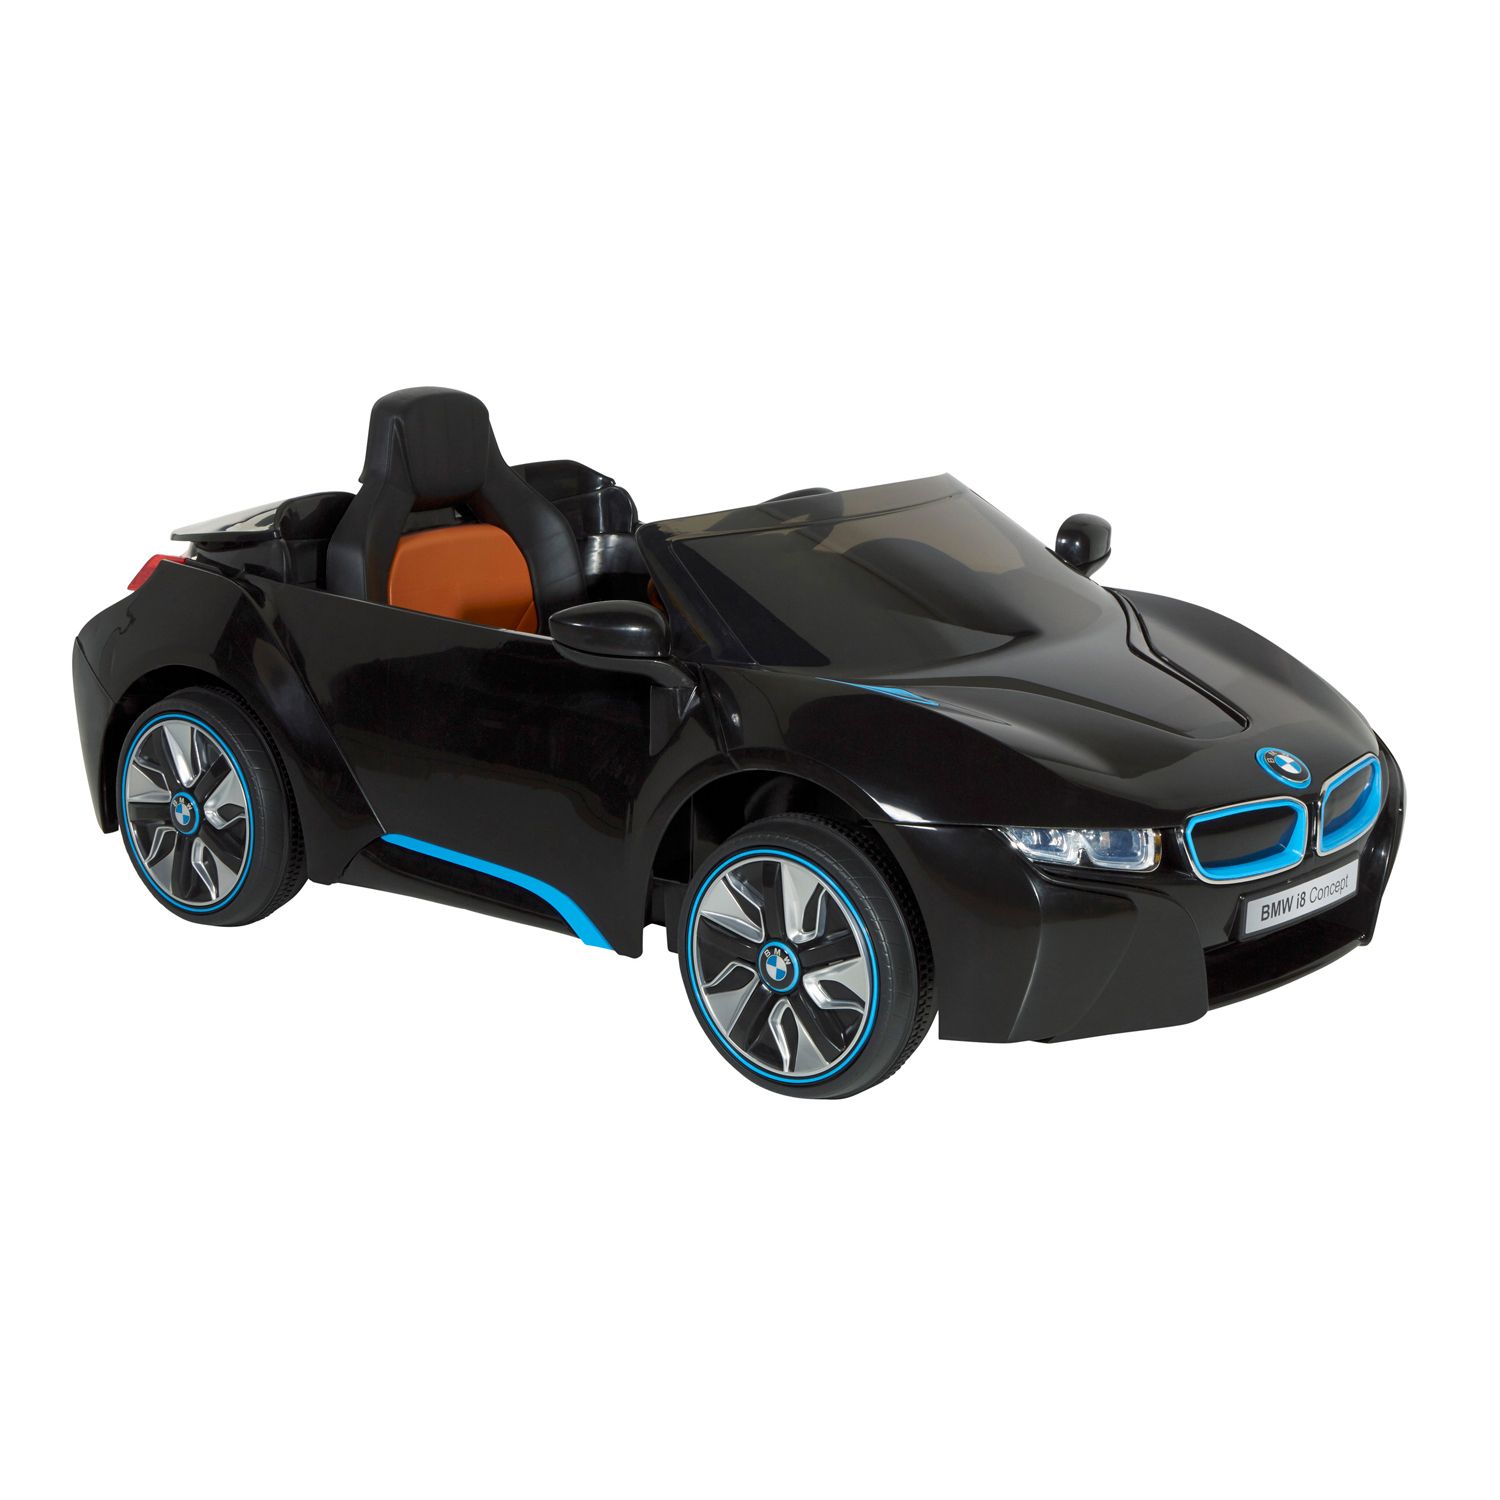 bmw ride on toy